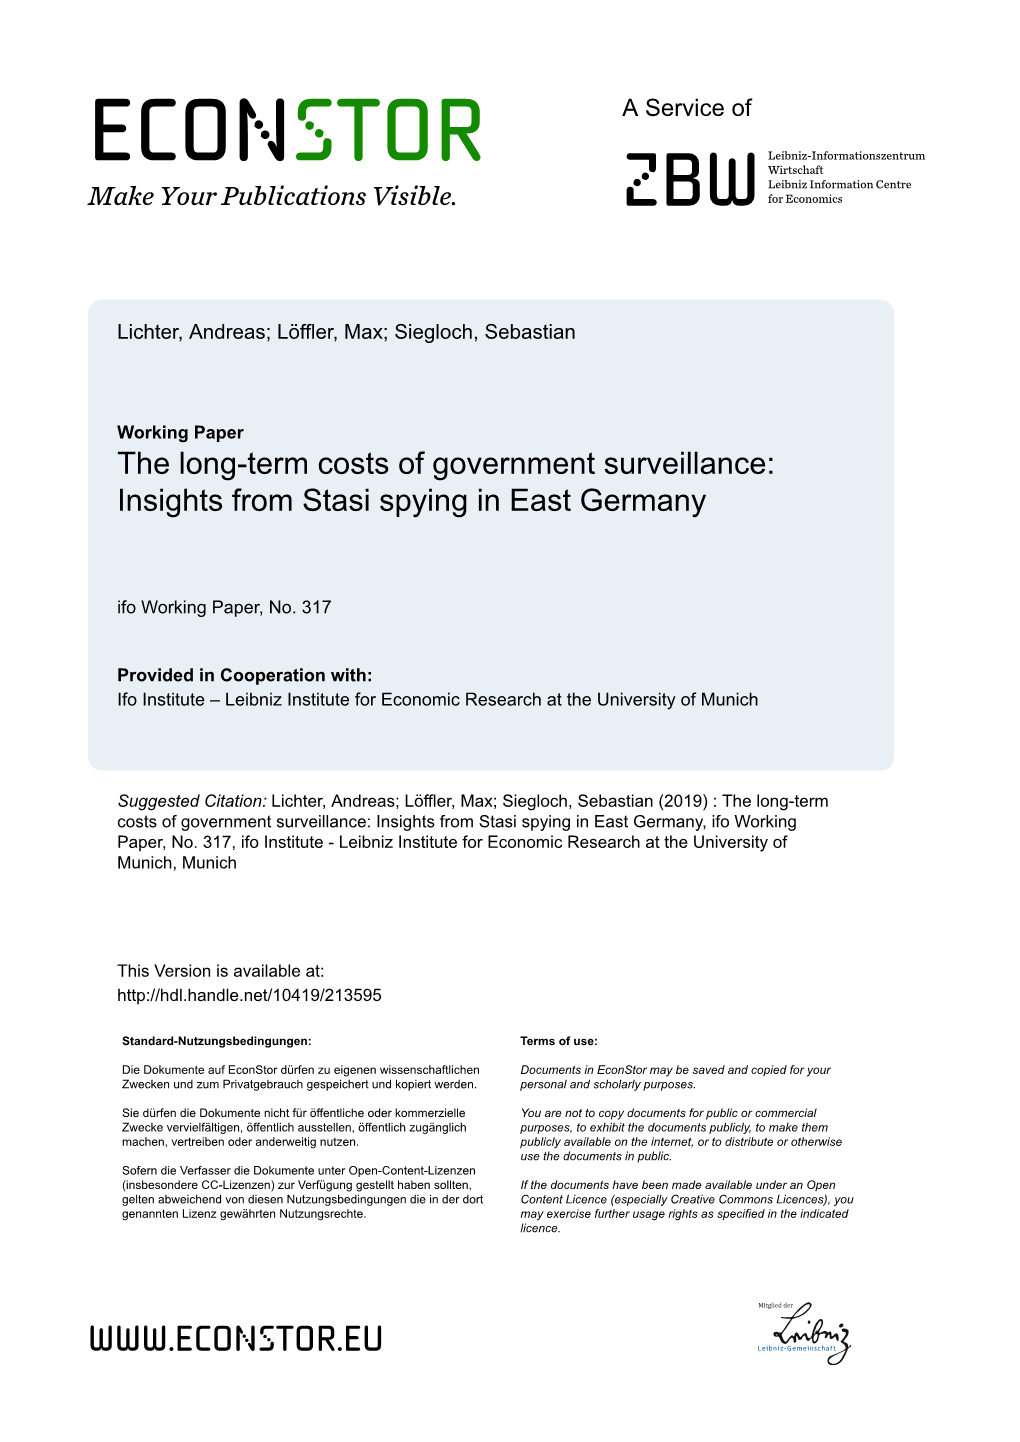 The Long-Term Costs of Government Surveillance: Insights from Stasi Spying in East Germany